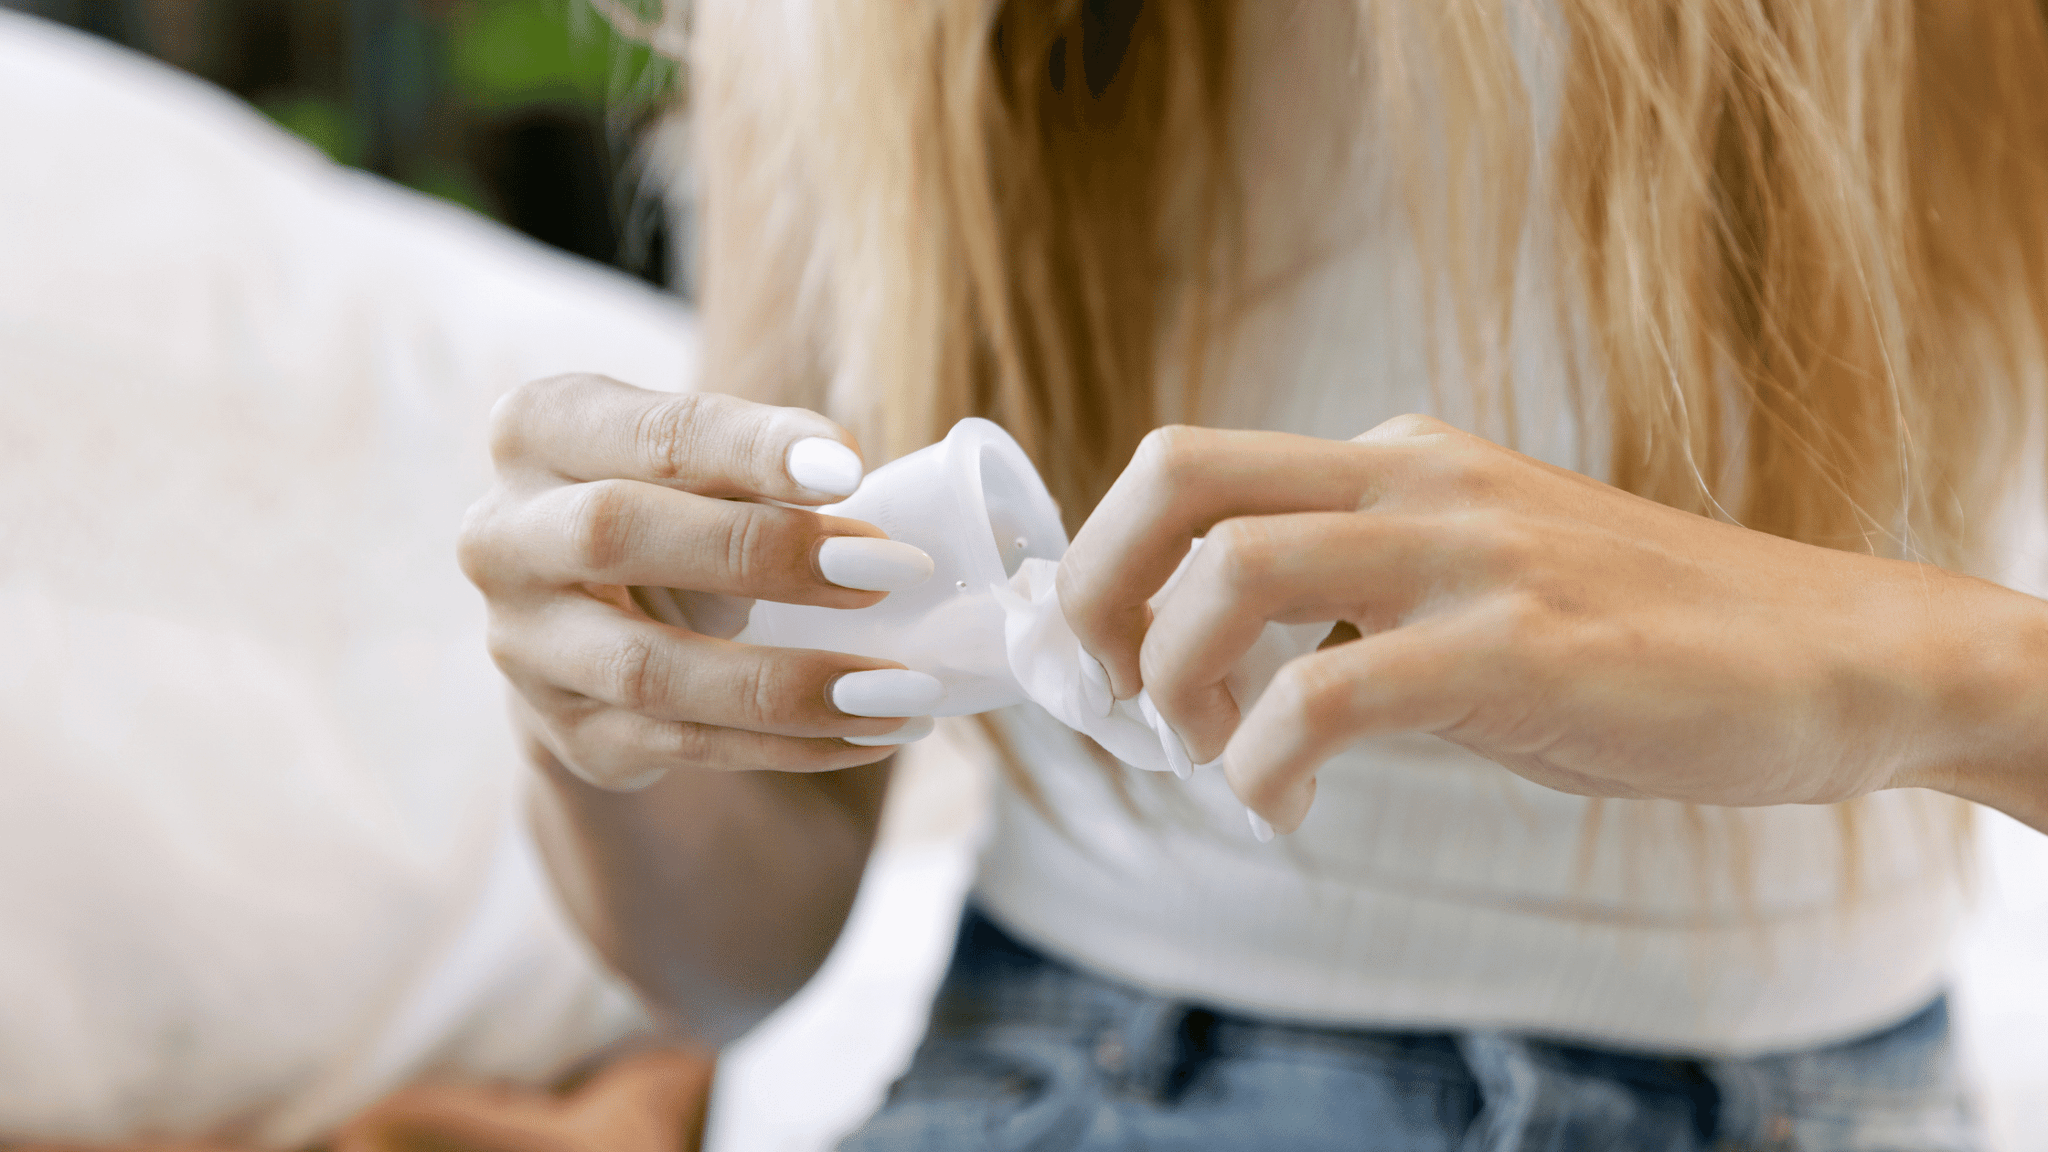 How Do I Clean My Menstrual Cup? Your Go-To Guide for Cleaning Your June Cup